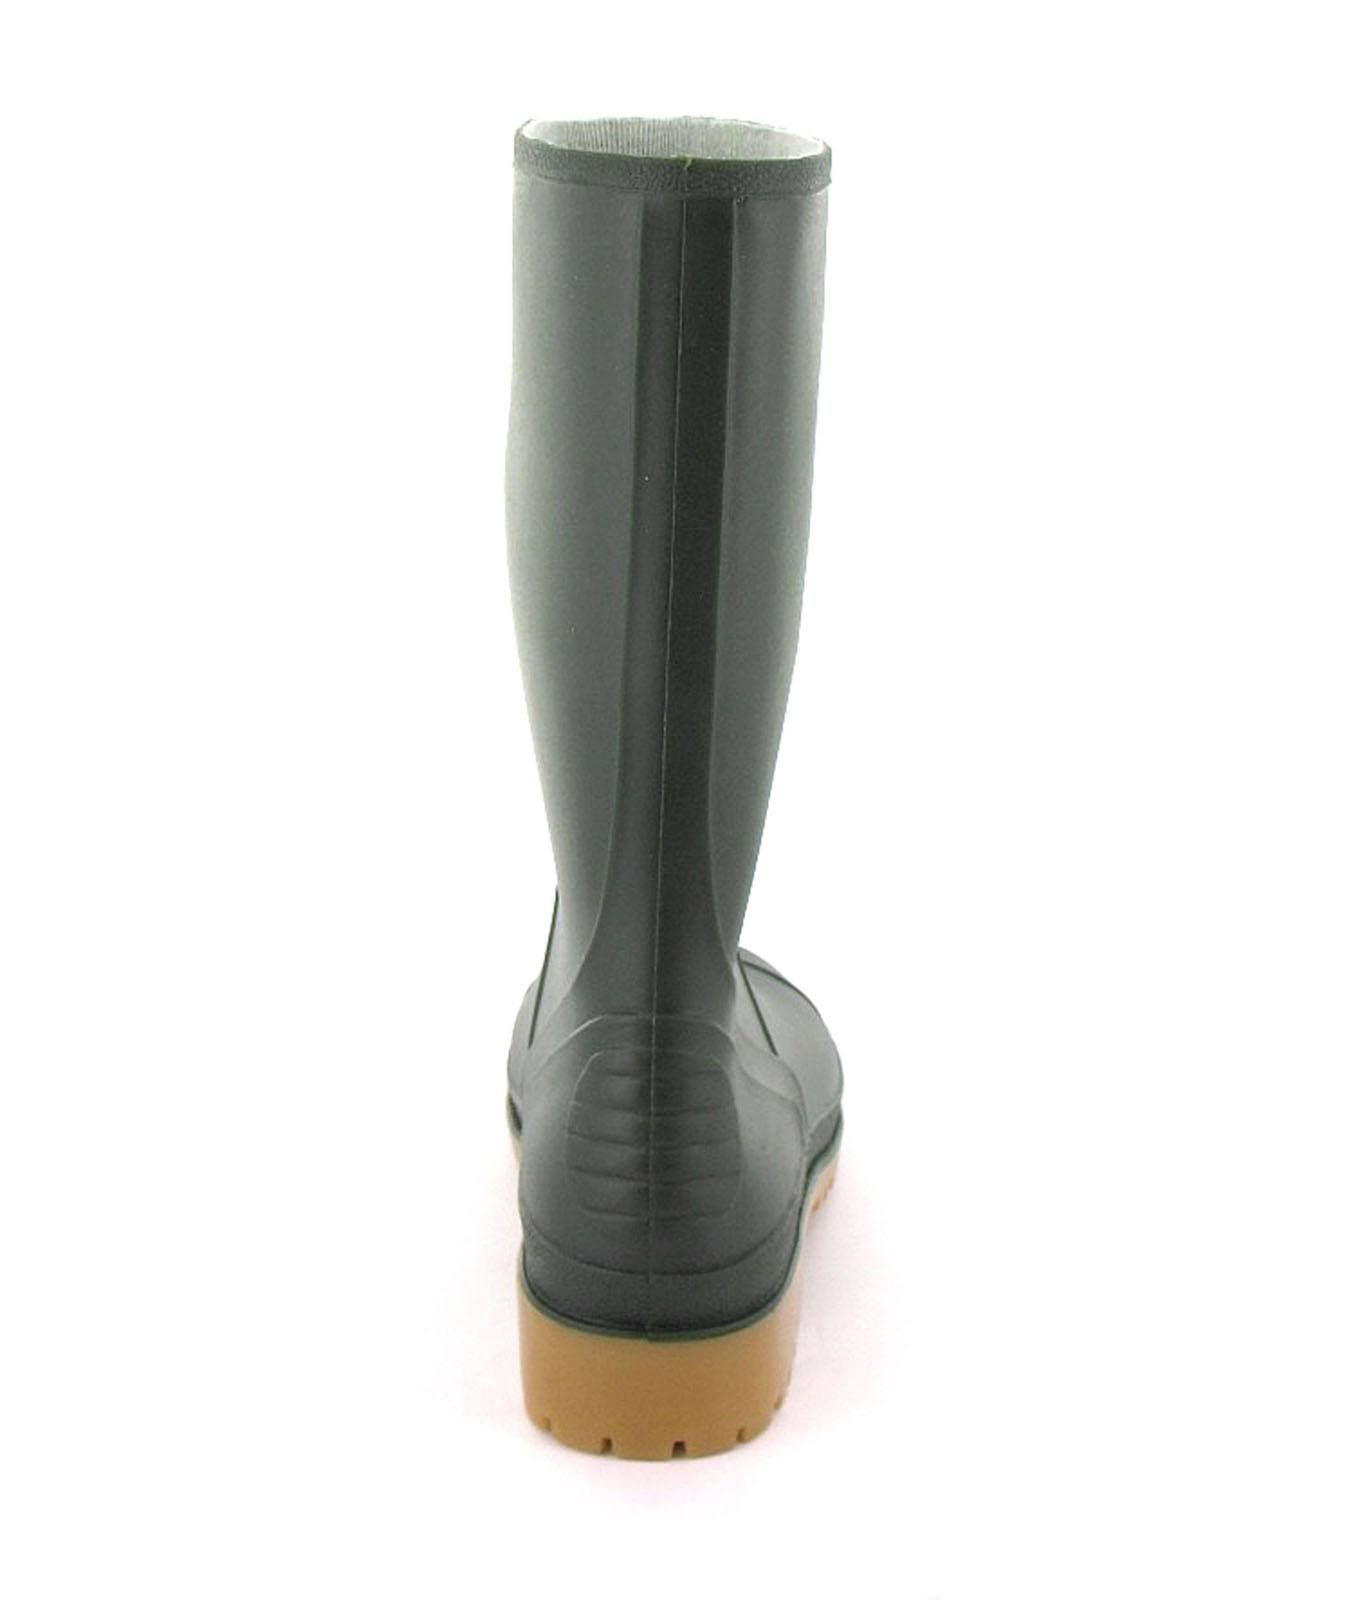 New Boys/Childrens Green Pvc Long Leg Wellington Boots. Manmade Upper. Fabric Lining. Synthetic Sole. Kids Childs Green Wellies Wellys Outdoors Rain Boots Wet.